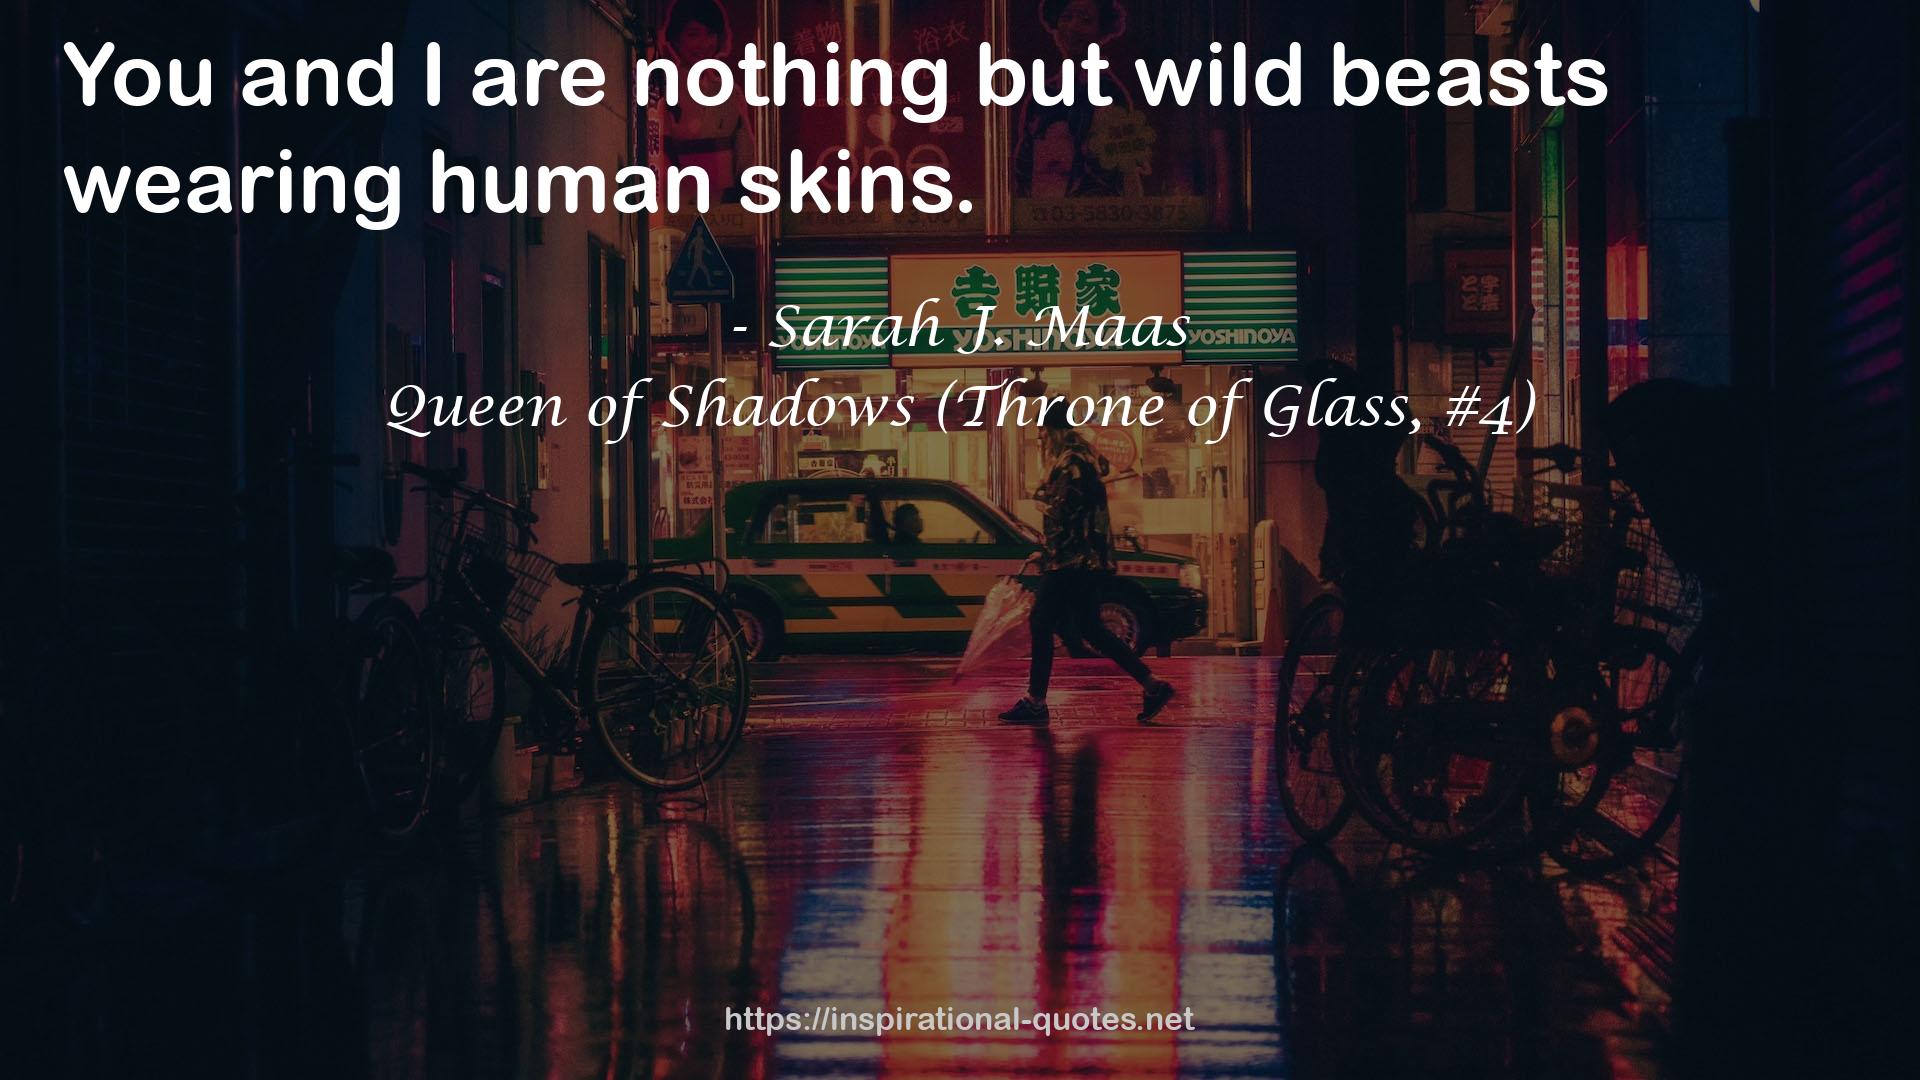 Queen of Shadows (Throne of Glass, #4) QUOTES